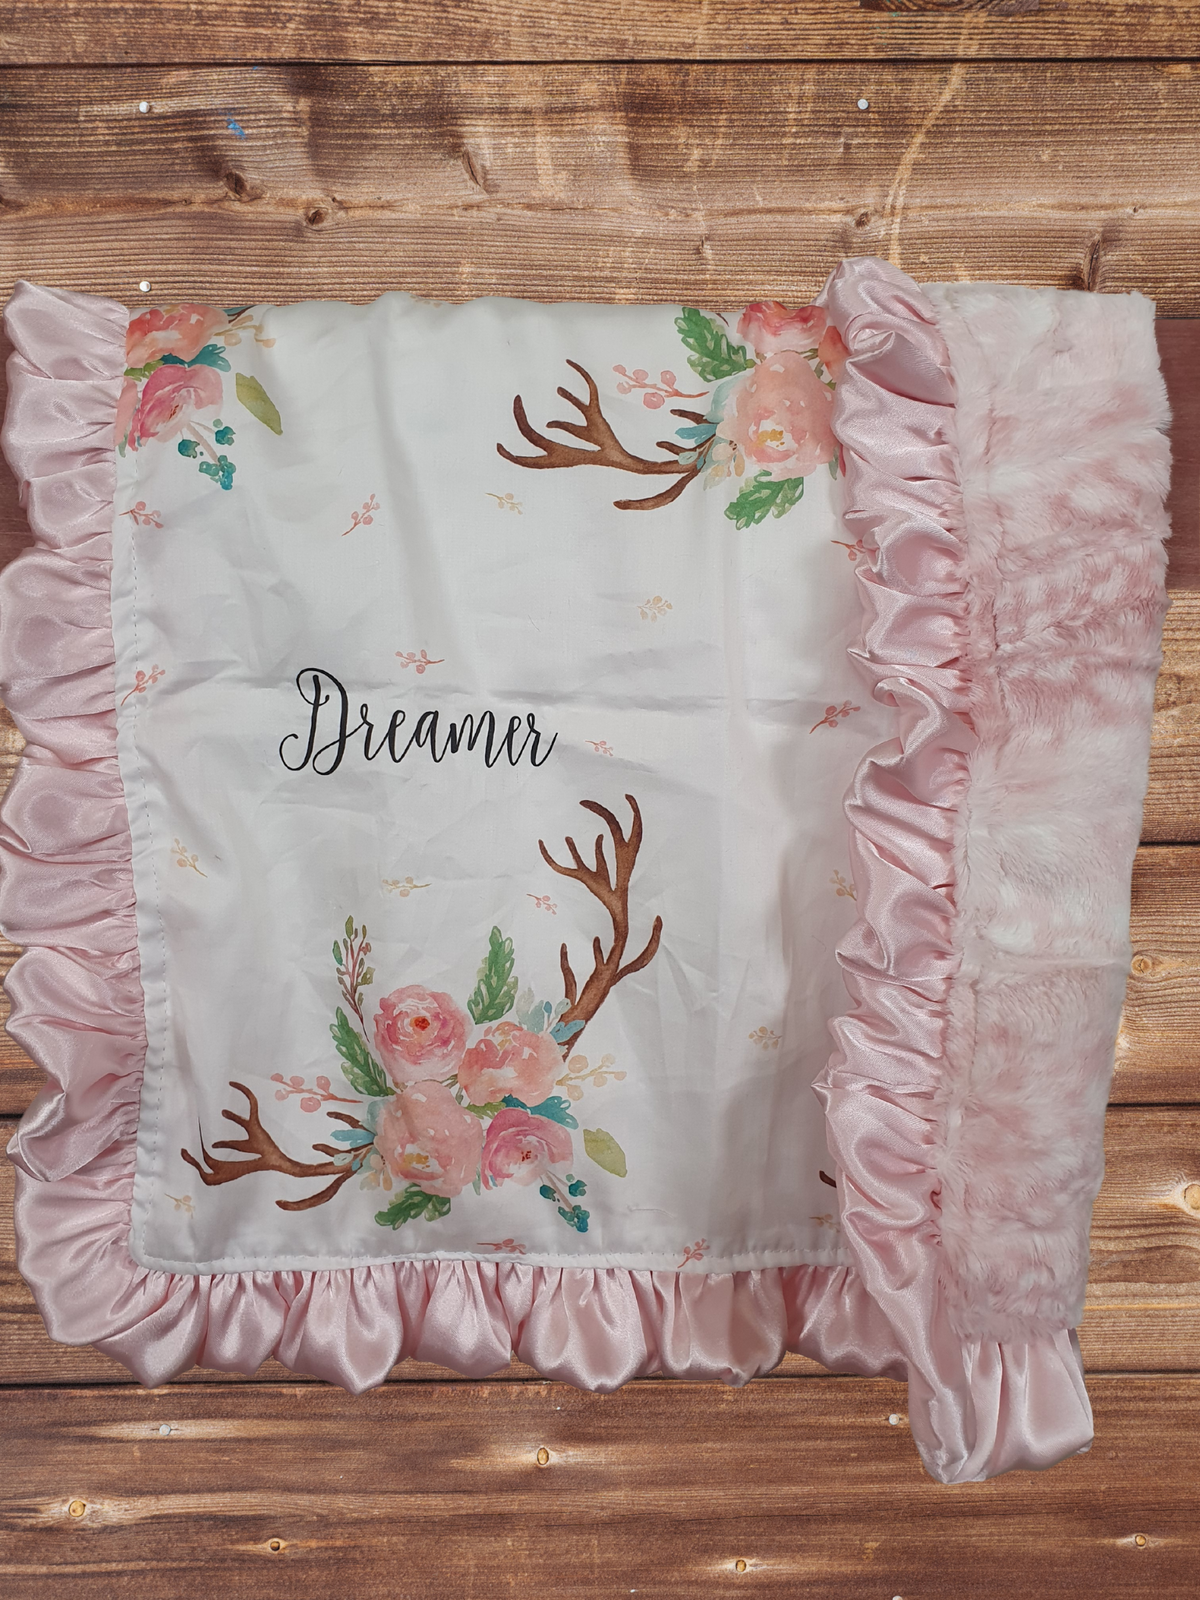 Ruffle Baby Lovey - Dreamer Floral Antler and Rosewater Fawn Minky Lovey - DBC Baby Bedding Co 